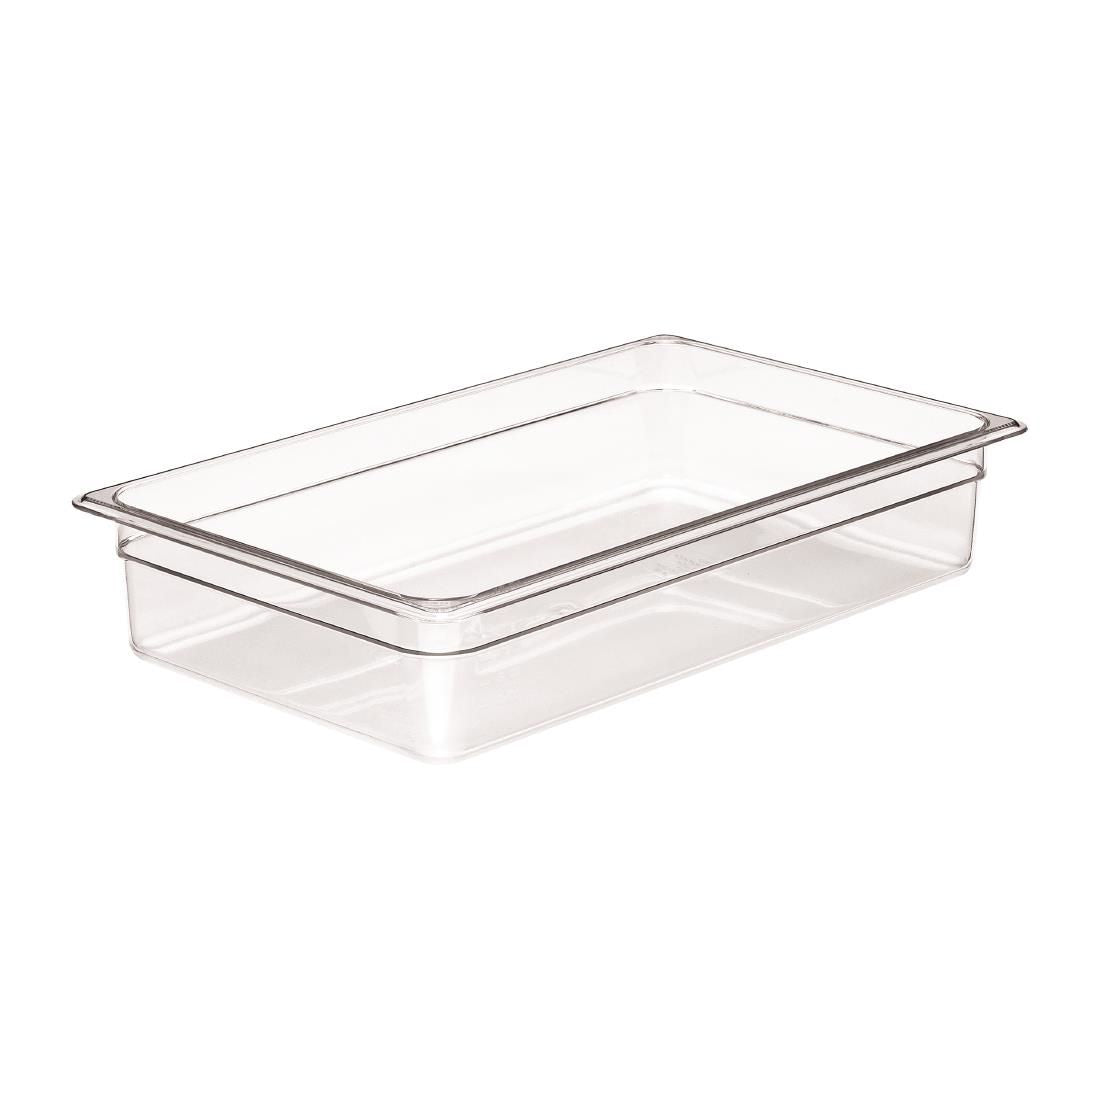 DM729 Cambro Polycarbonate 1/1 Gastronorm Pan 100mm JD Catering Equipment Solutions Ltd